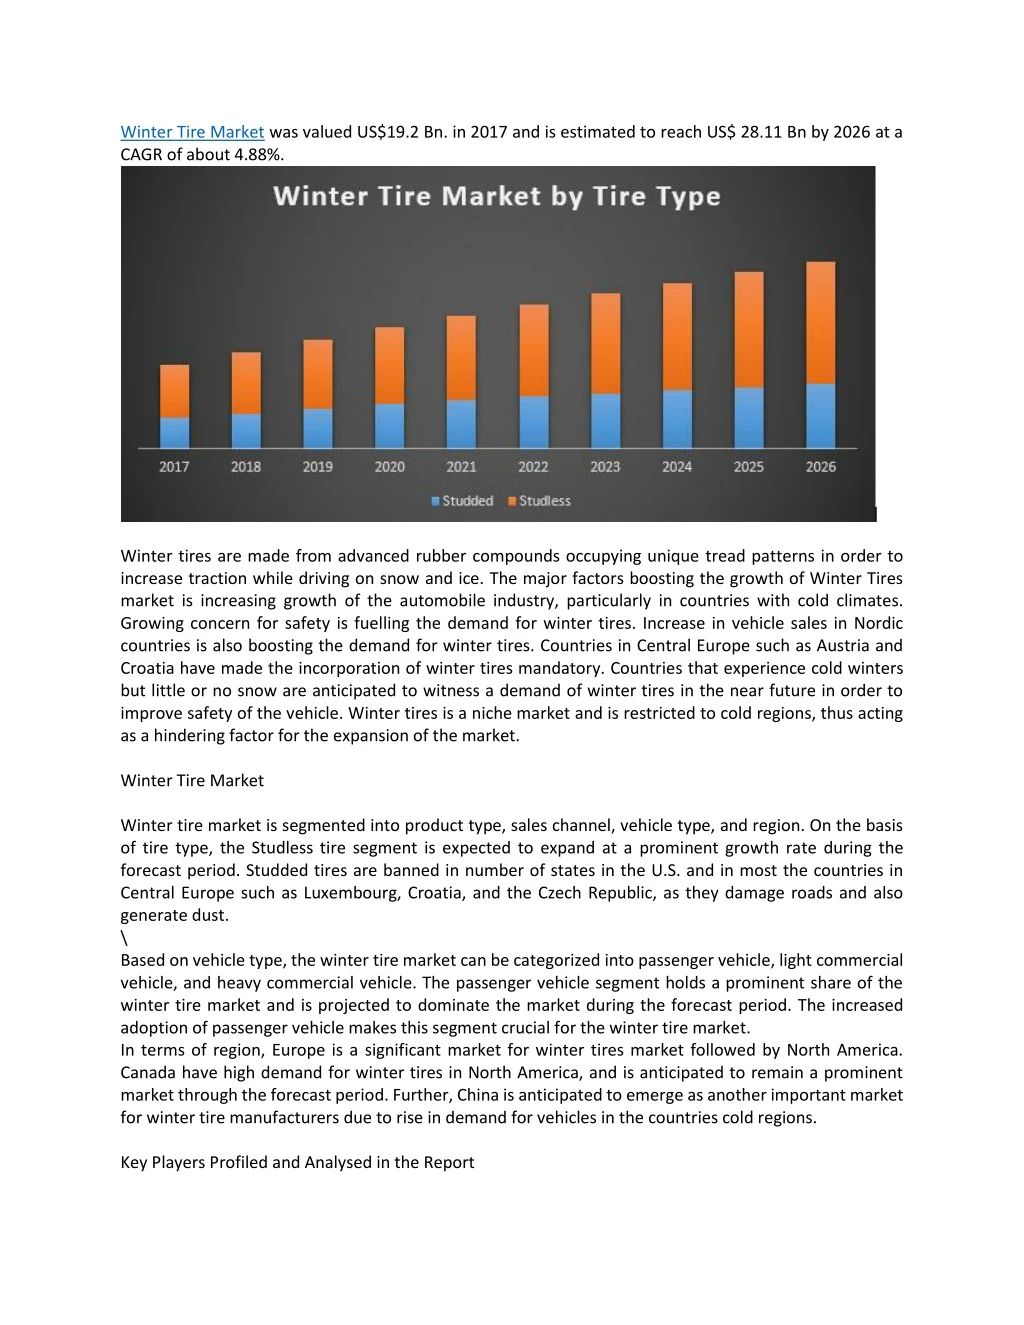 winter tire market was valued us 19 2 bn in 2017